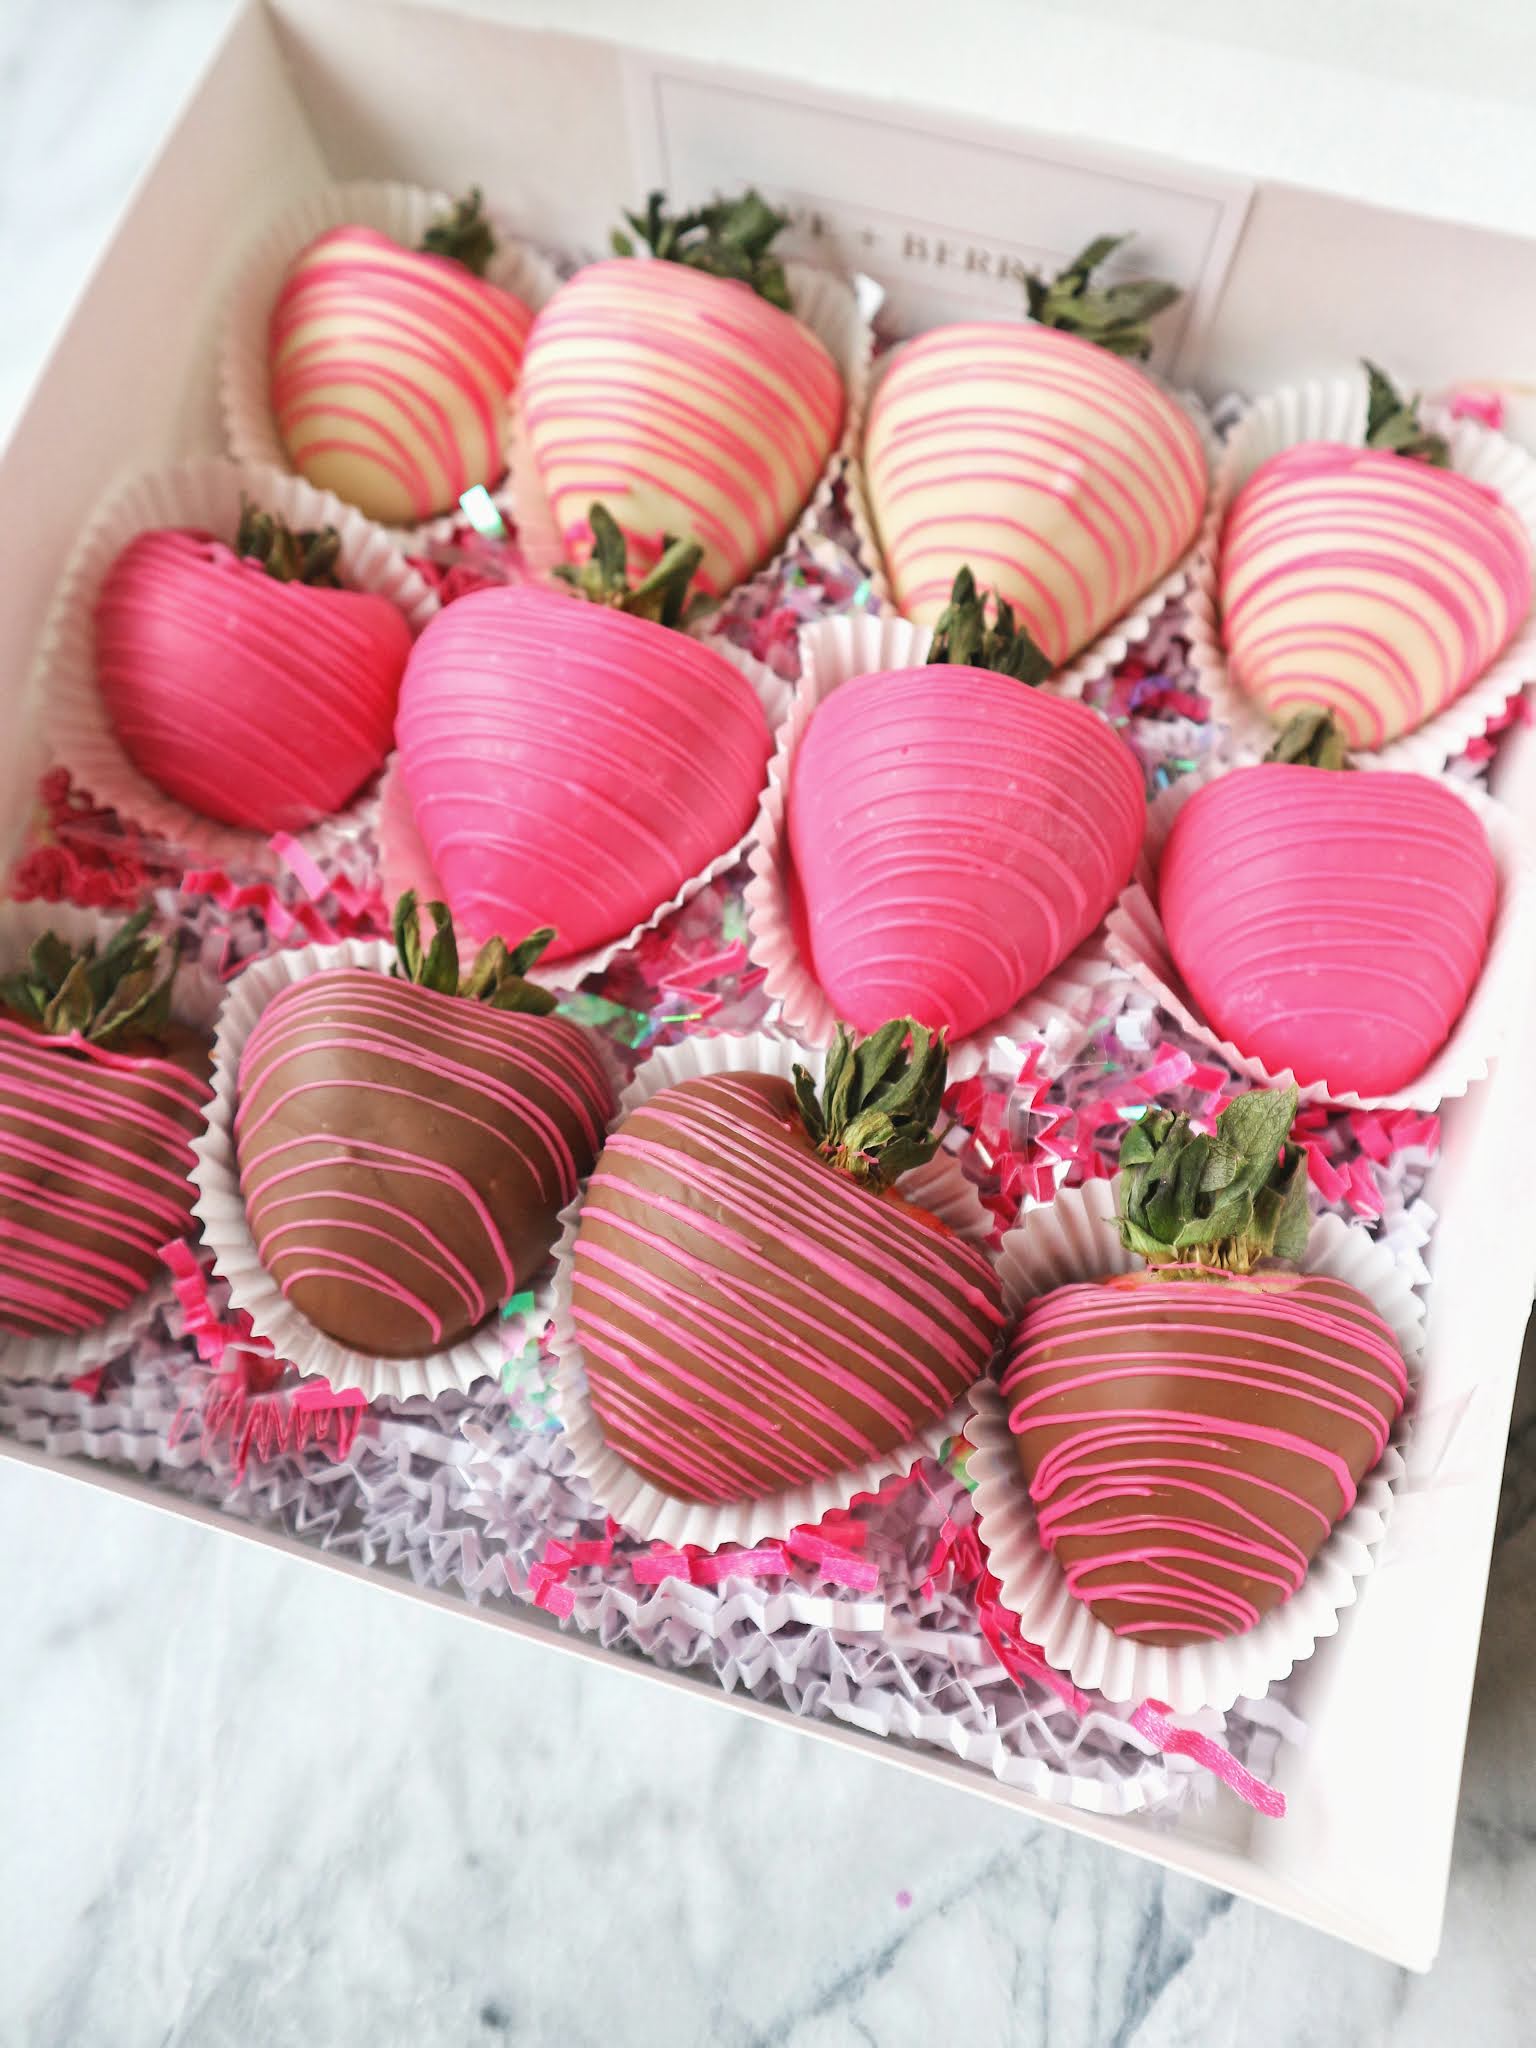 chocolate covered strawberries, kingston holiday foodie gift guide